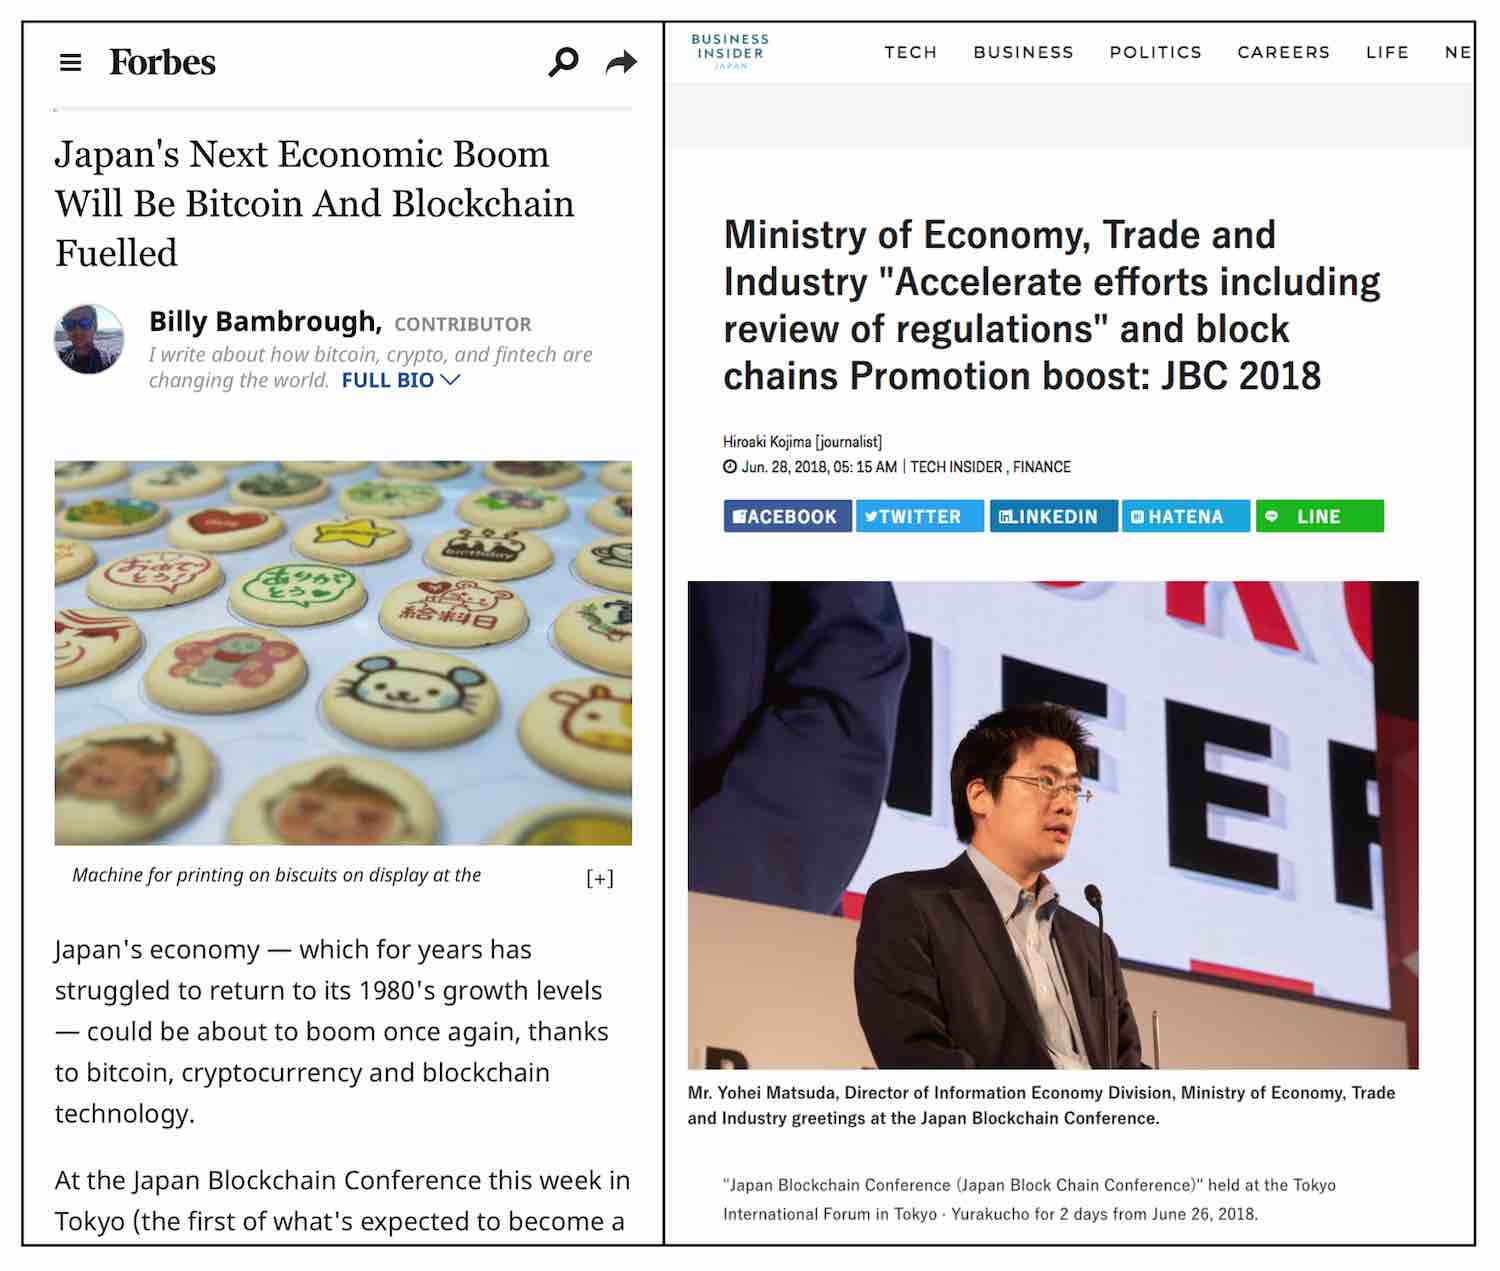 Linked To Boosting Japan's Economy With Blockchain